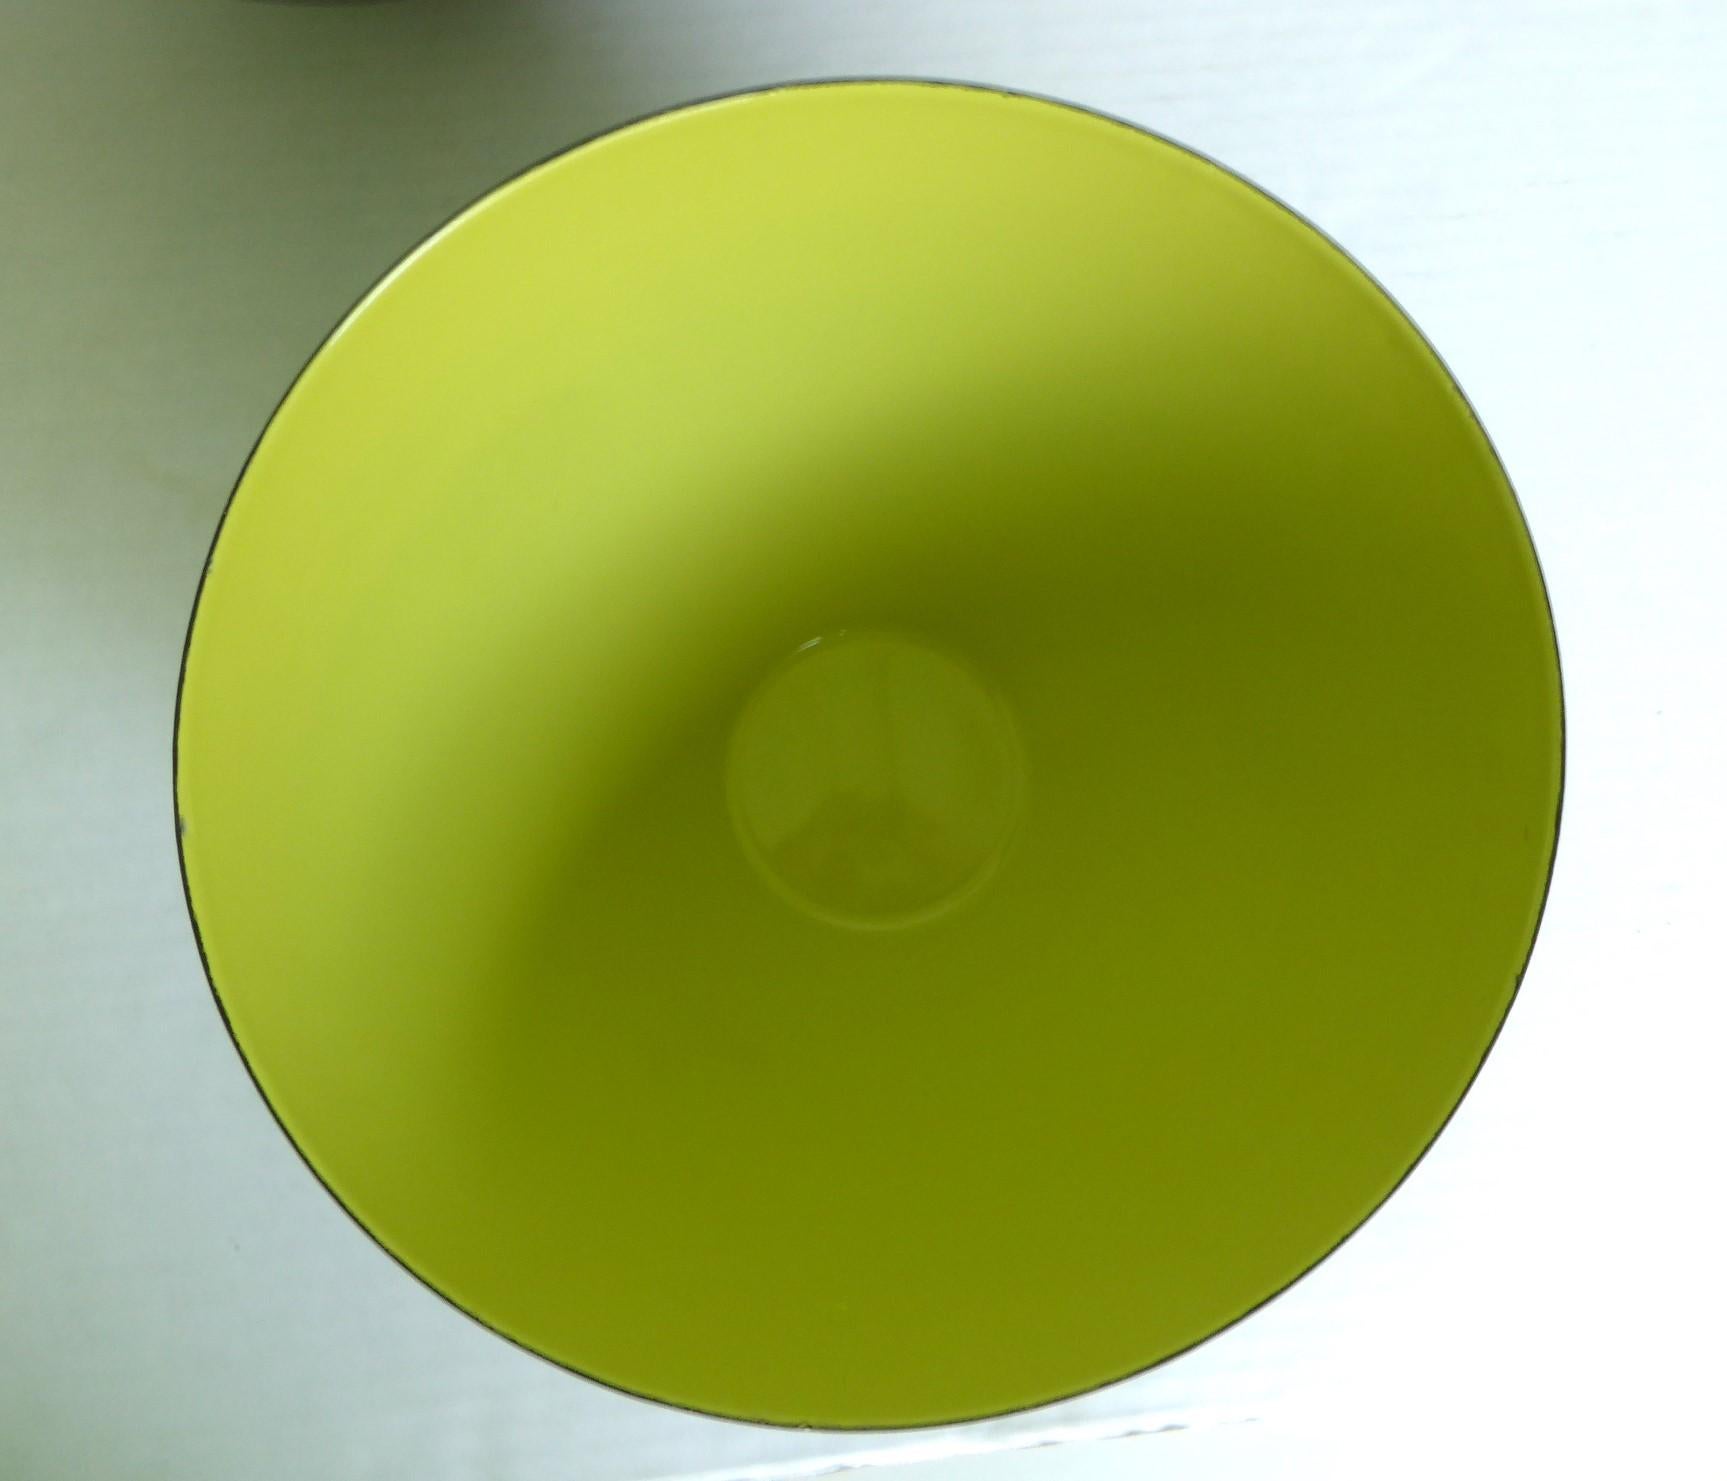 Danish Mid Century Modern large Krenit Salad Serving Bowl in Lime green designed by Herbert Krenchel and retailed by Torben Ørskov. The Krenit bowls came in 9 sizes and numerous colors.
The stamp on the bottom would sometimes rub off since the base